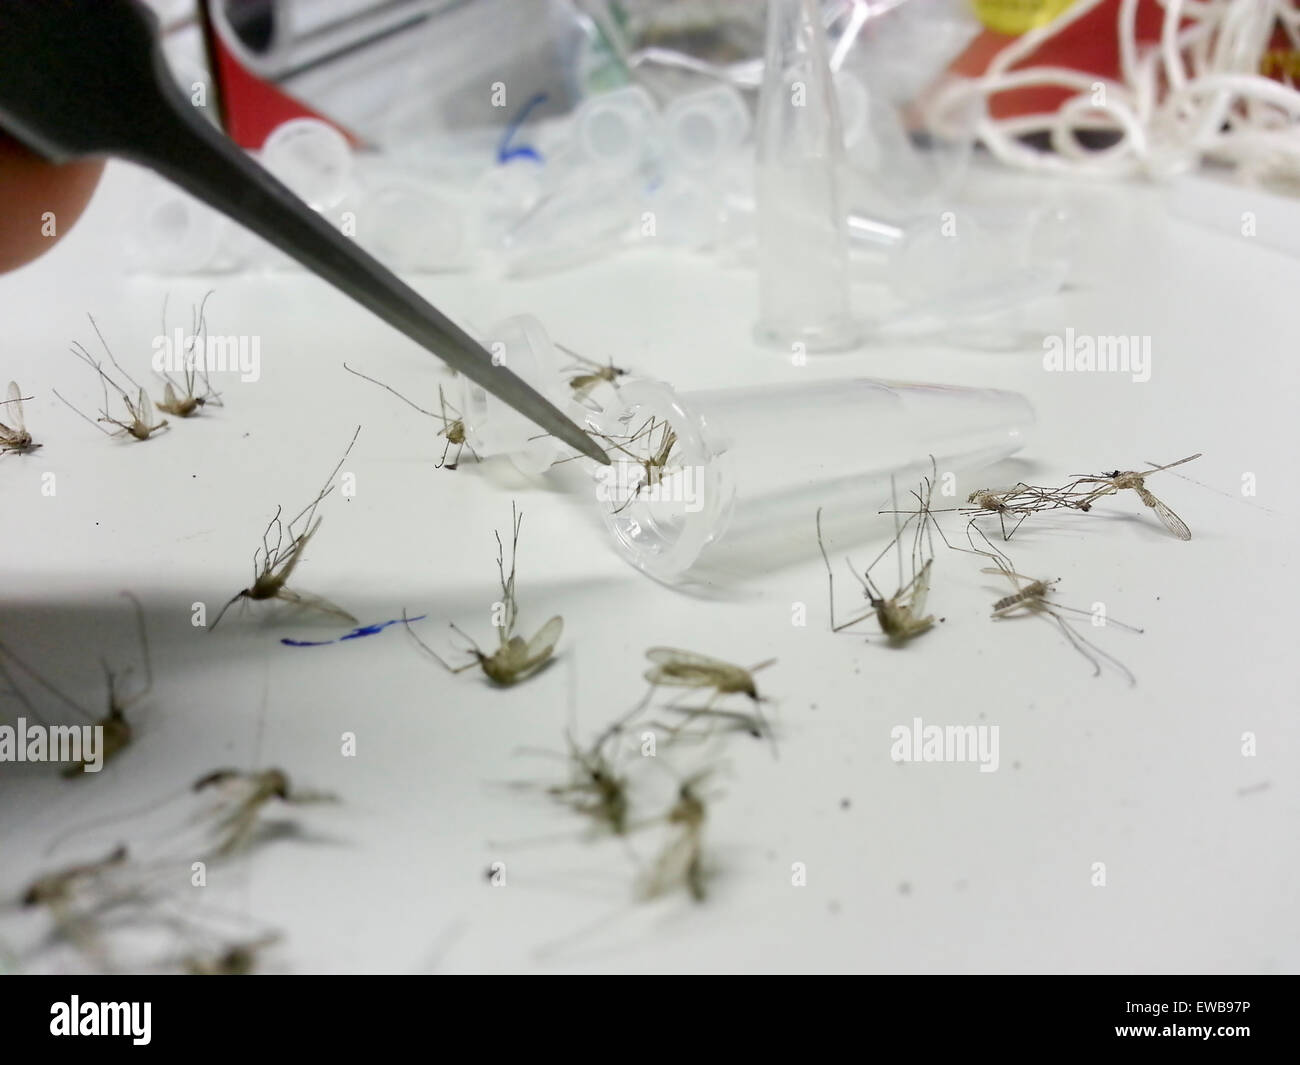 Mosquito Research - Mosquito being preserved in a vial. Photographed in Israel Stock Photo